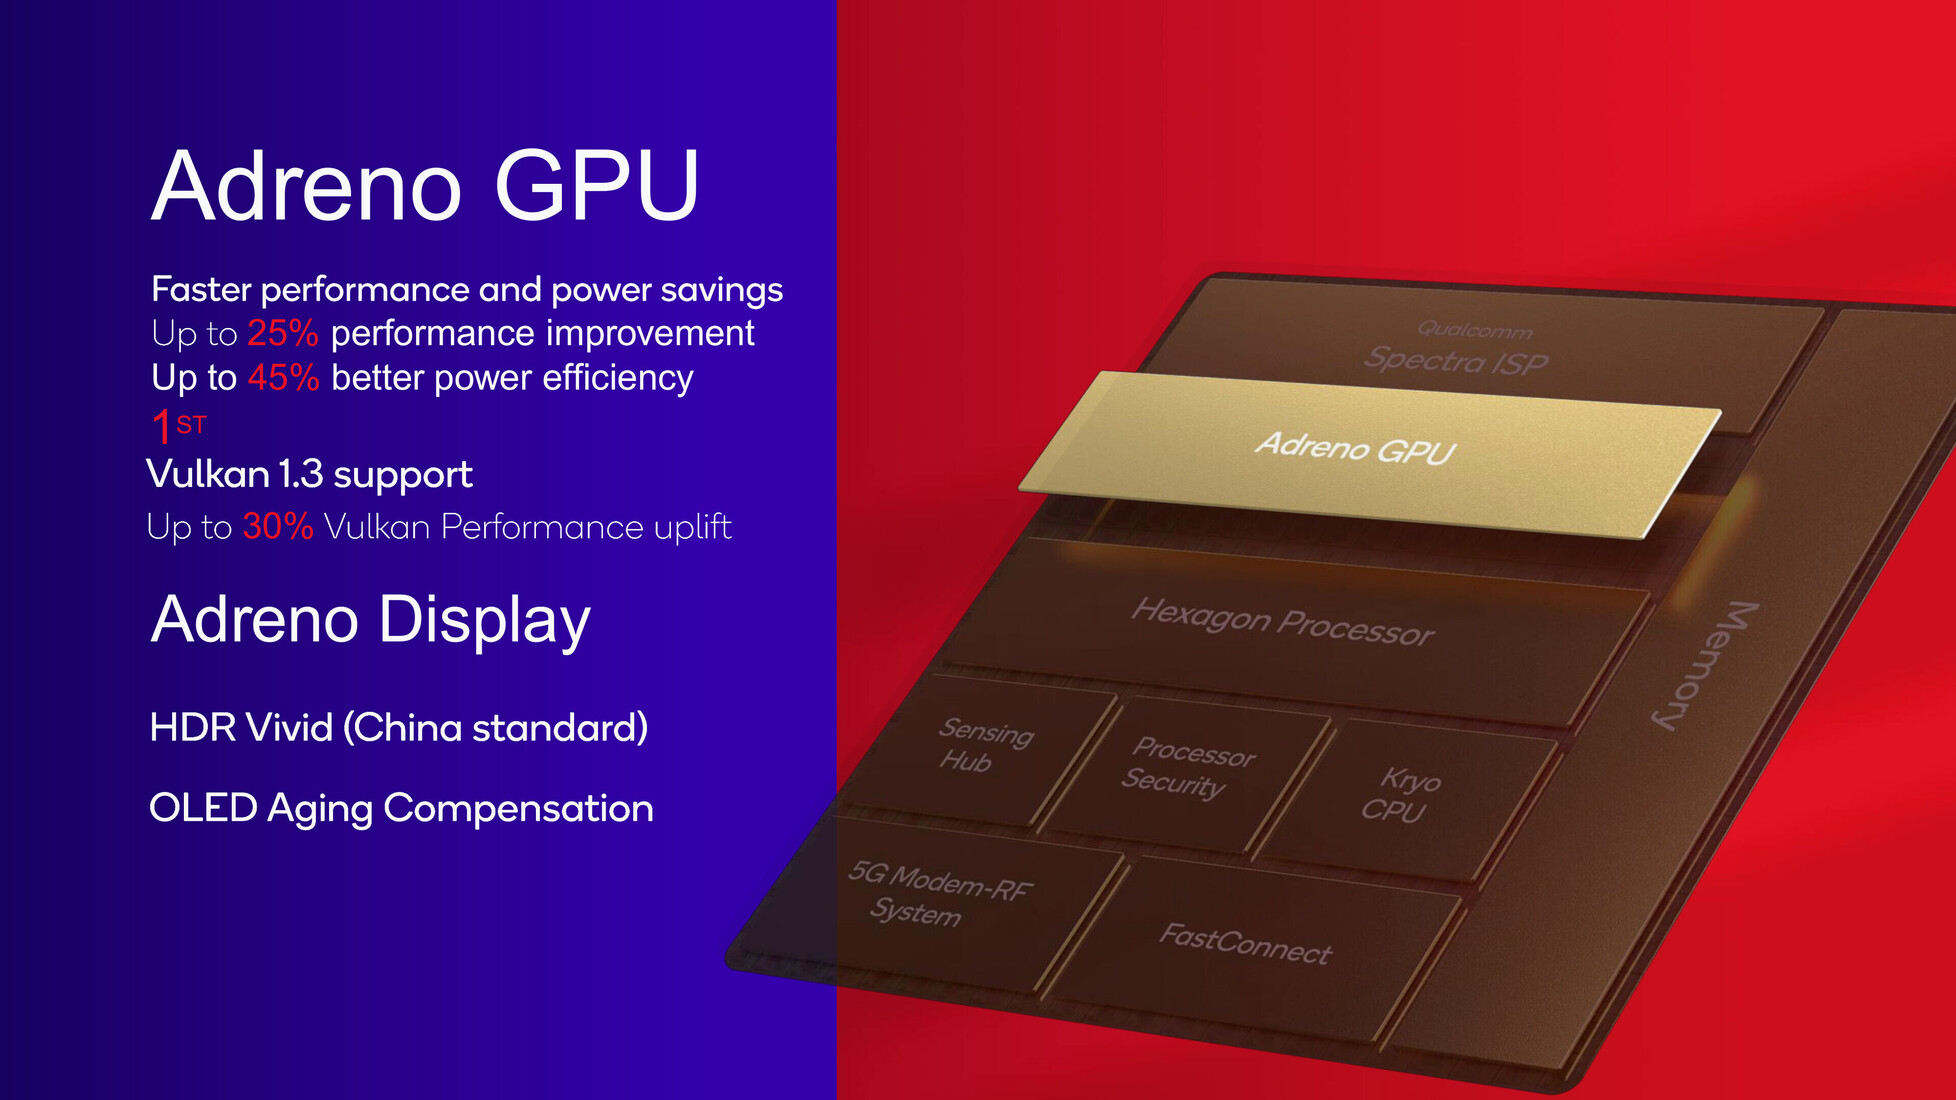 Snapdragon 8 Gen 3 GPU Could be 50% More Powerful Than Current Gen